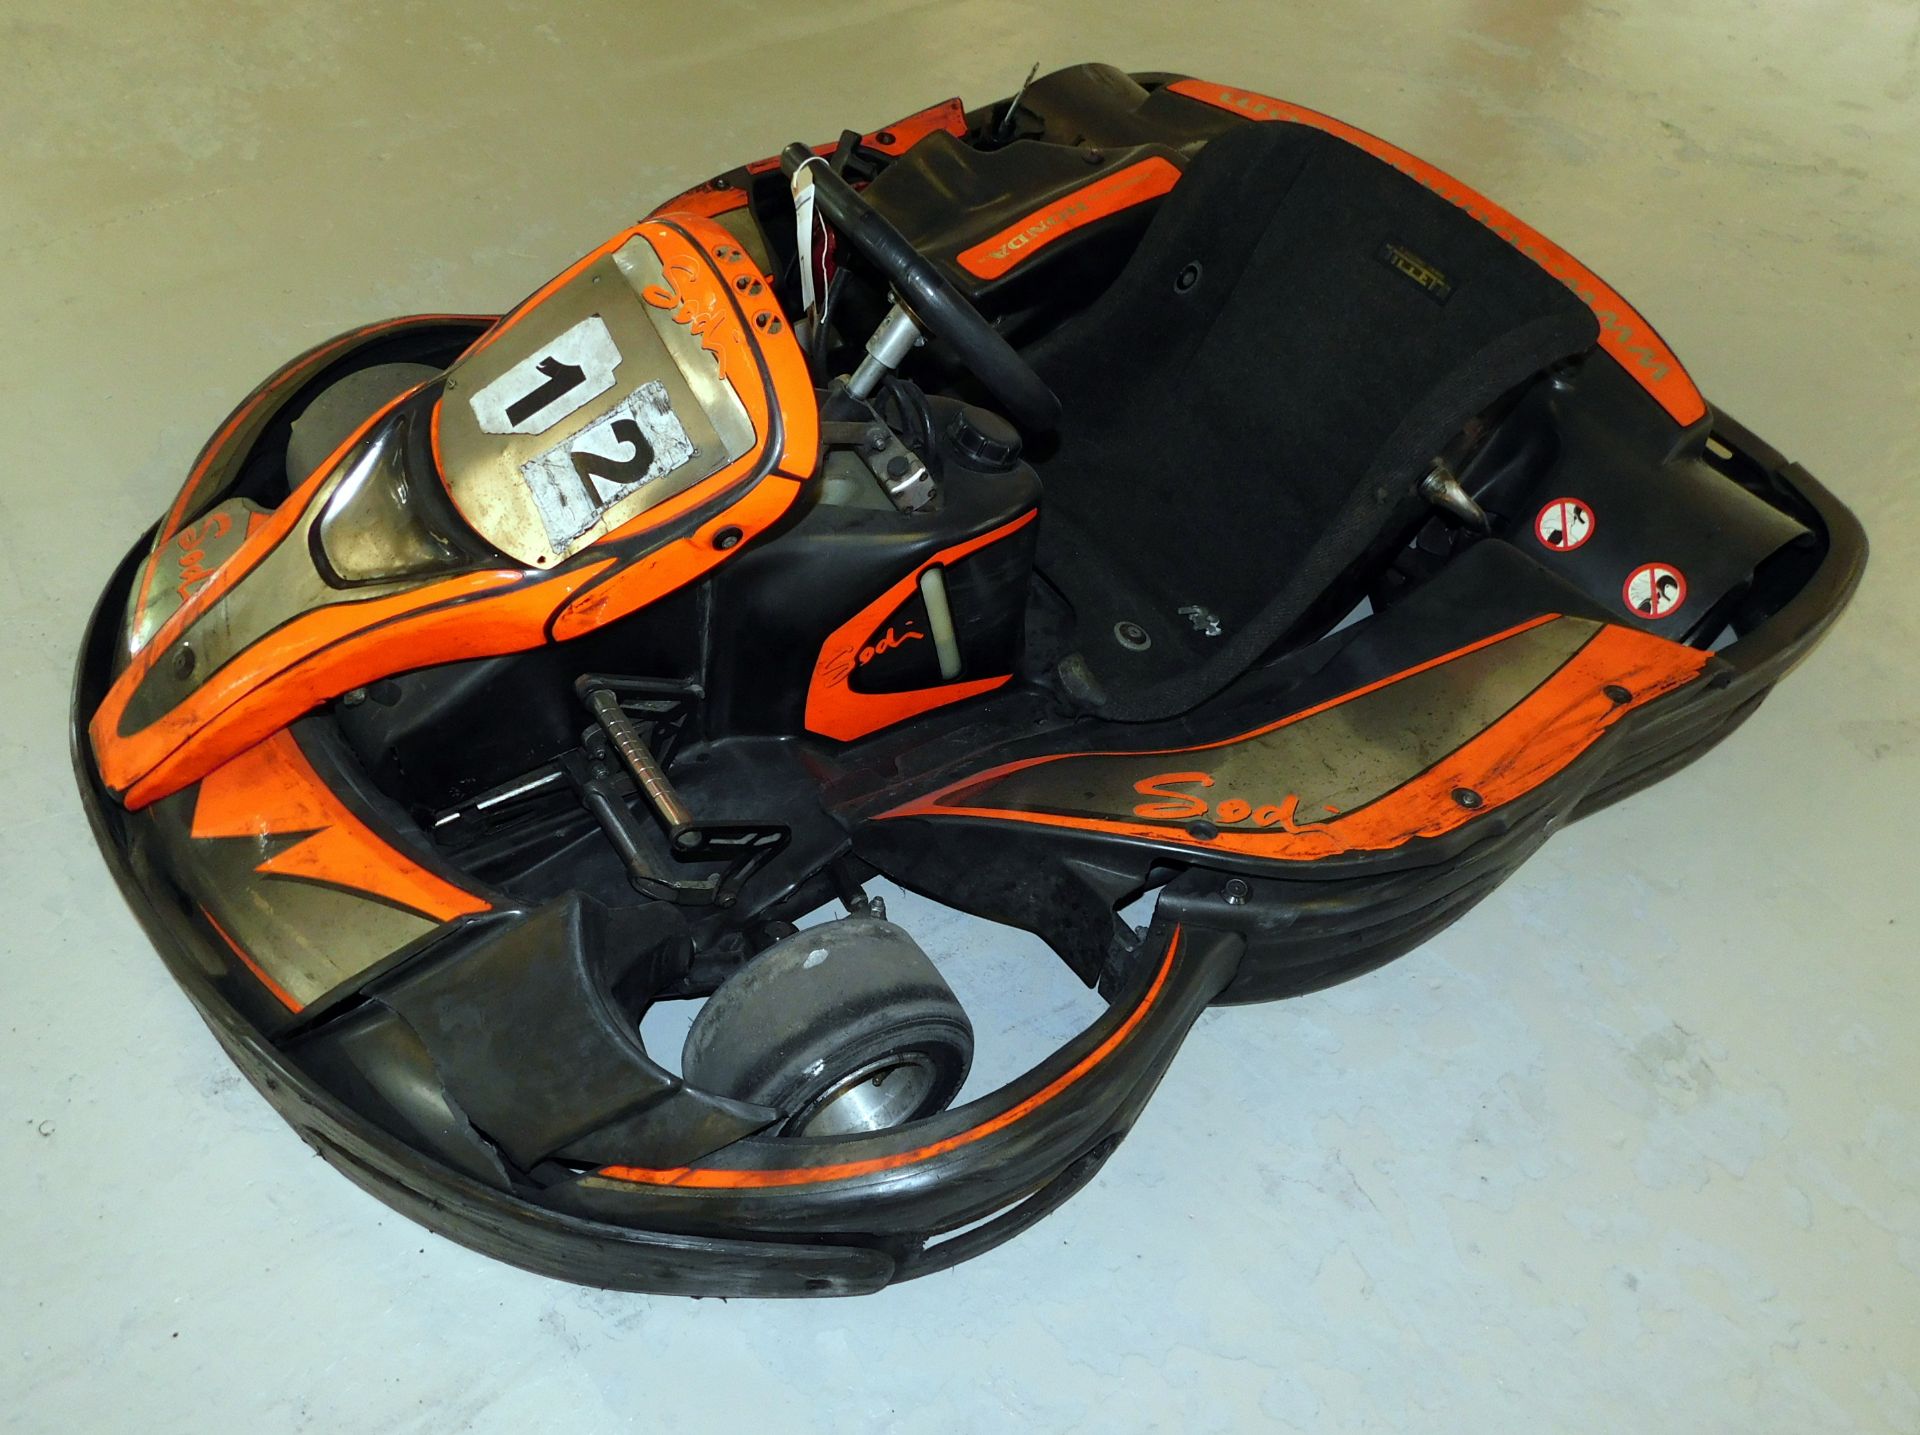 Sodi RX7 Petrol Powered Go-Kart with Honda 6.5 GX200 Engine (located in Bredbury, collection - Image 2 of 5